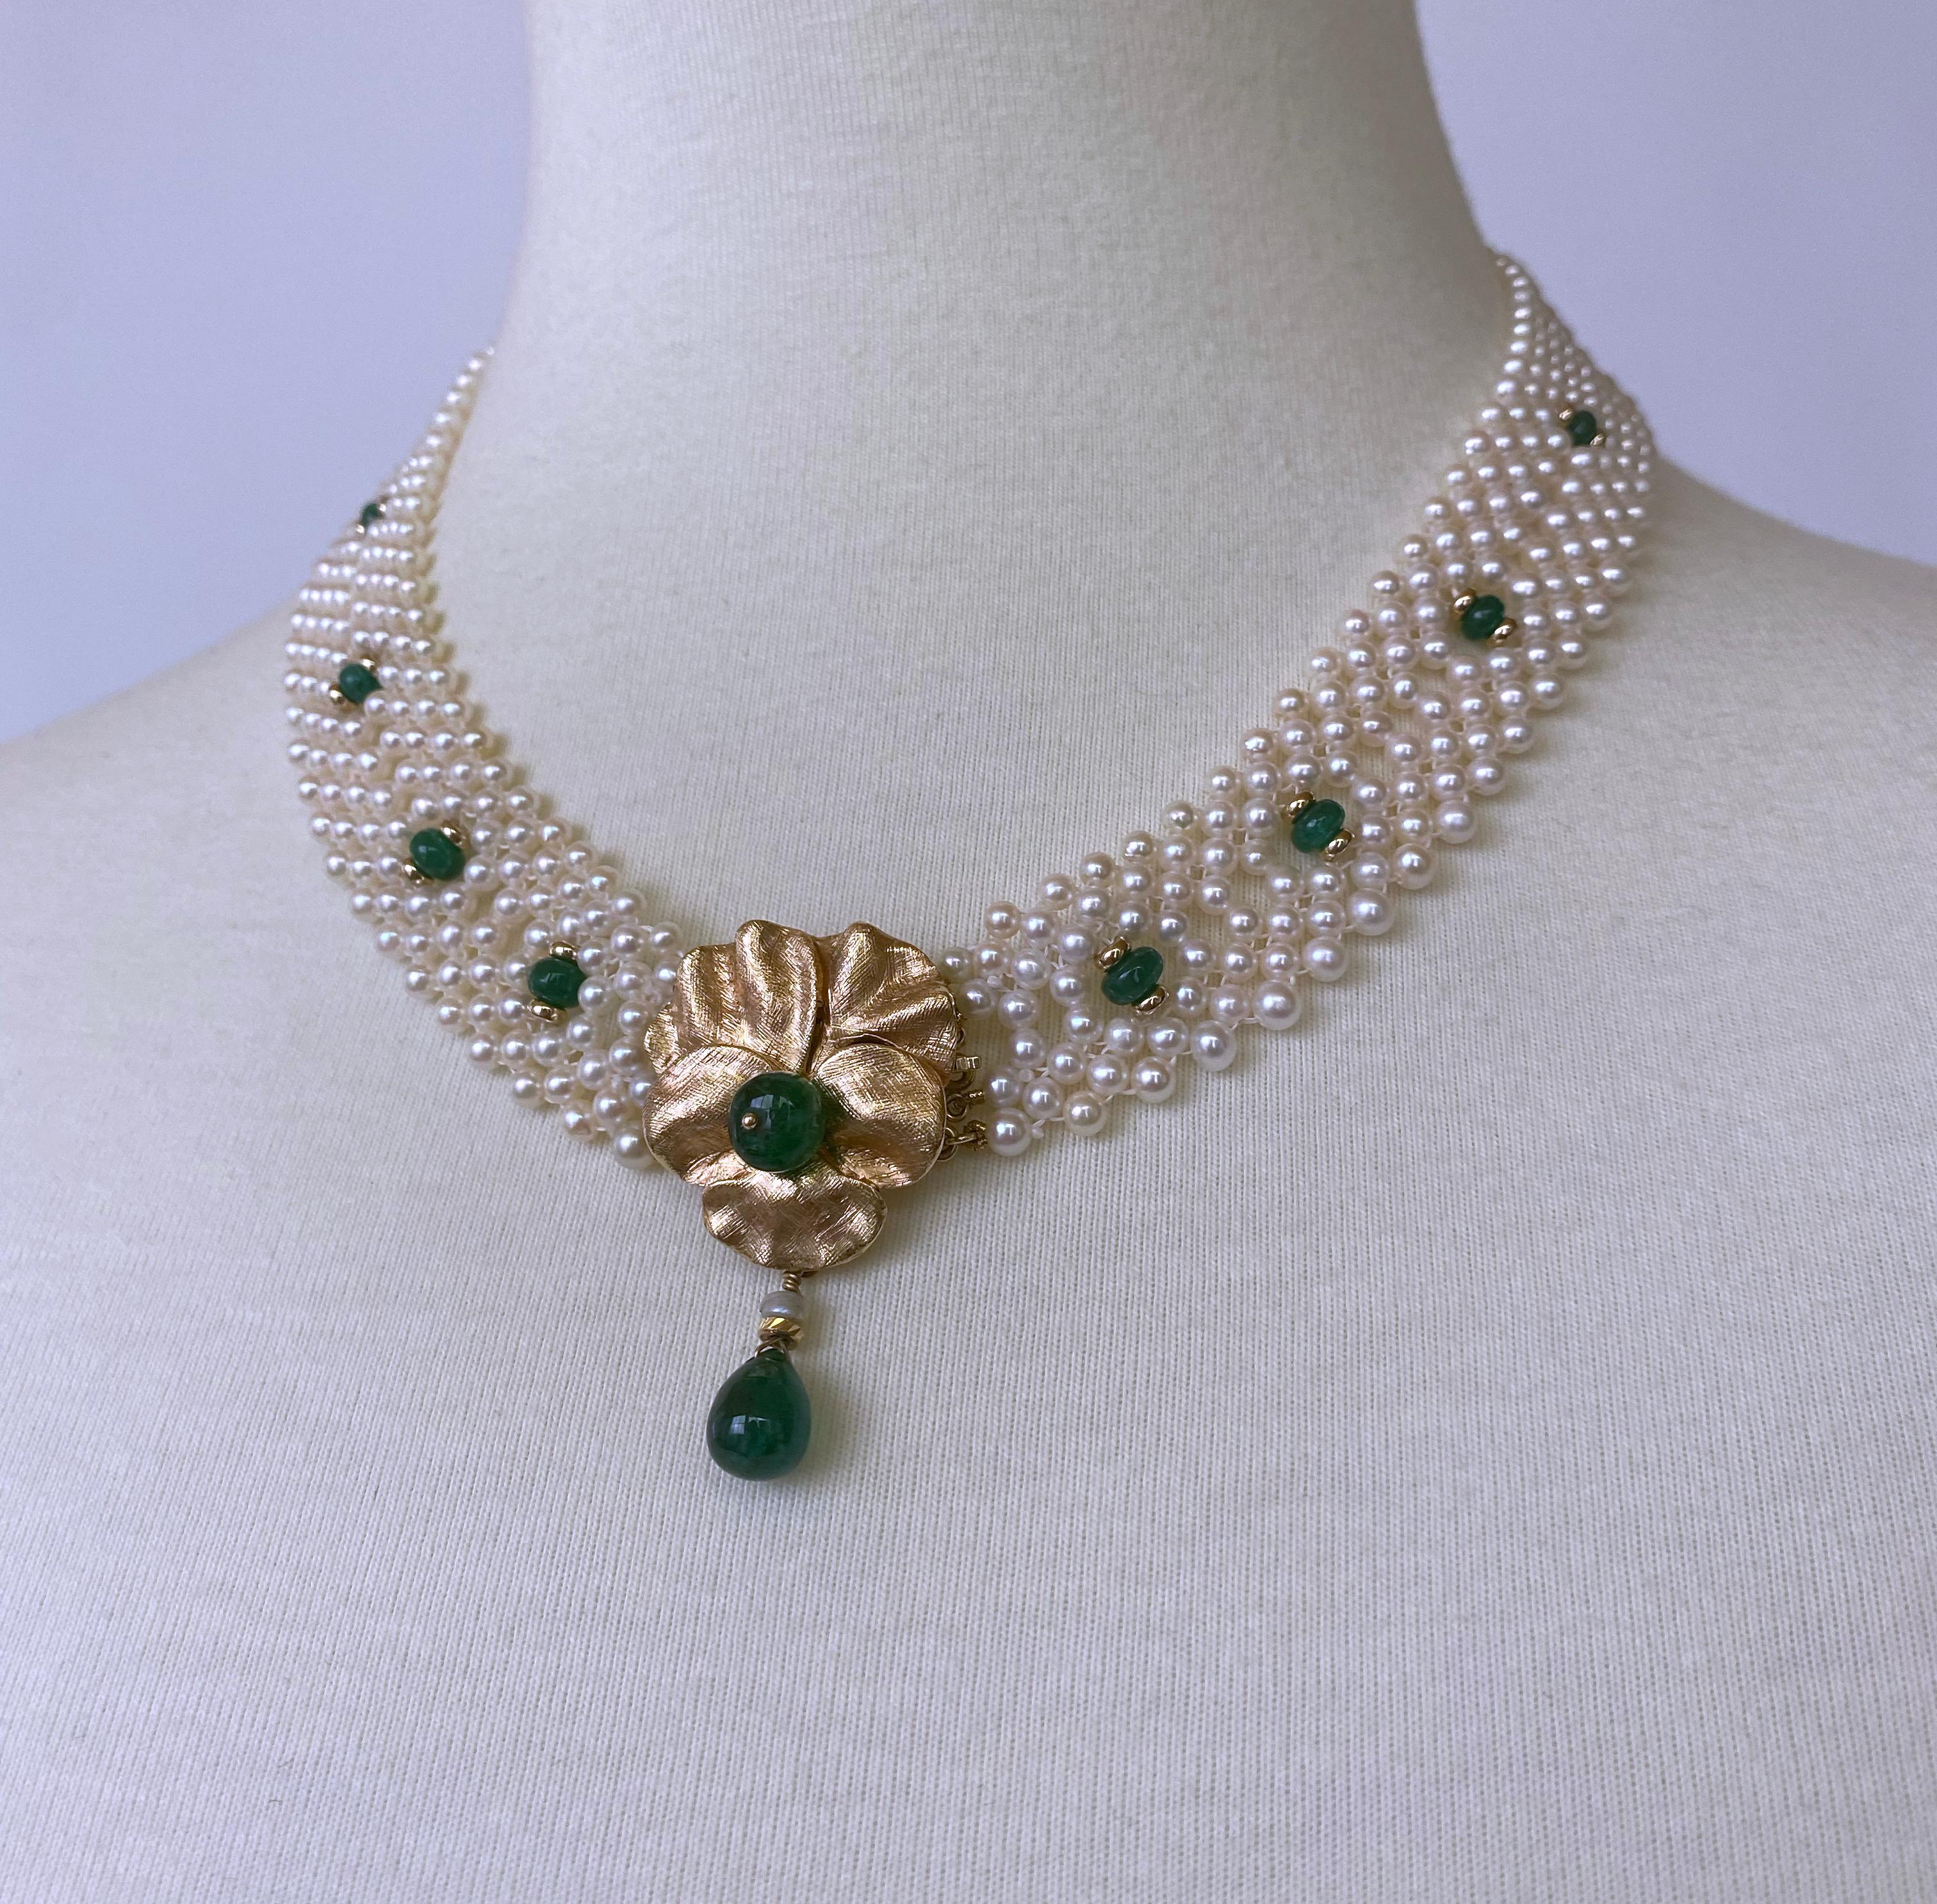 Marina J Woven Pearl & Emerald Infinity Necklace with Vintage 14k Centerpiece 2